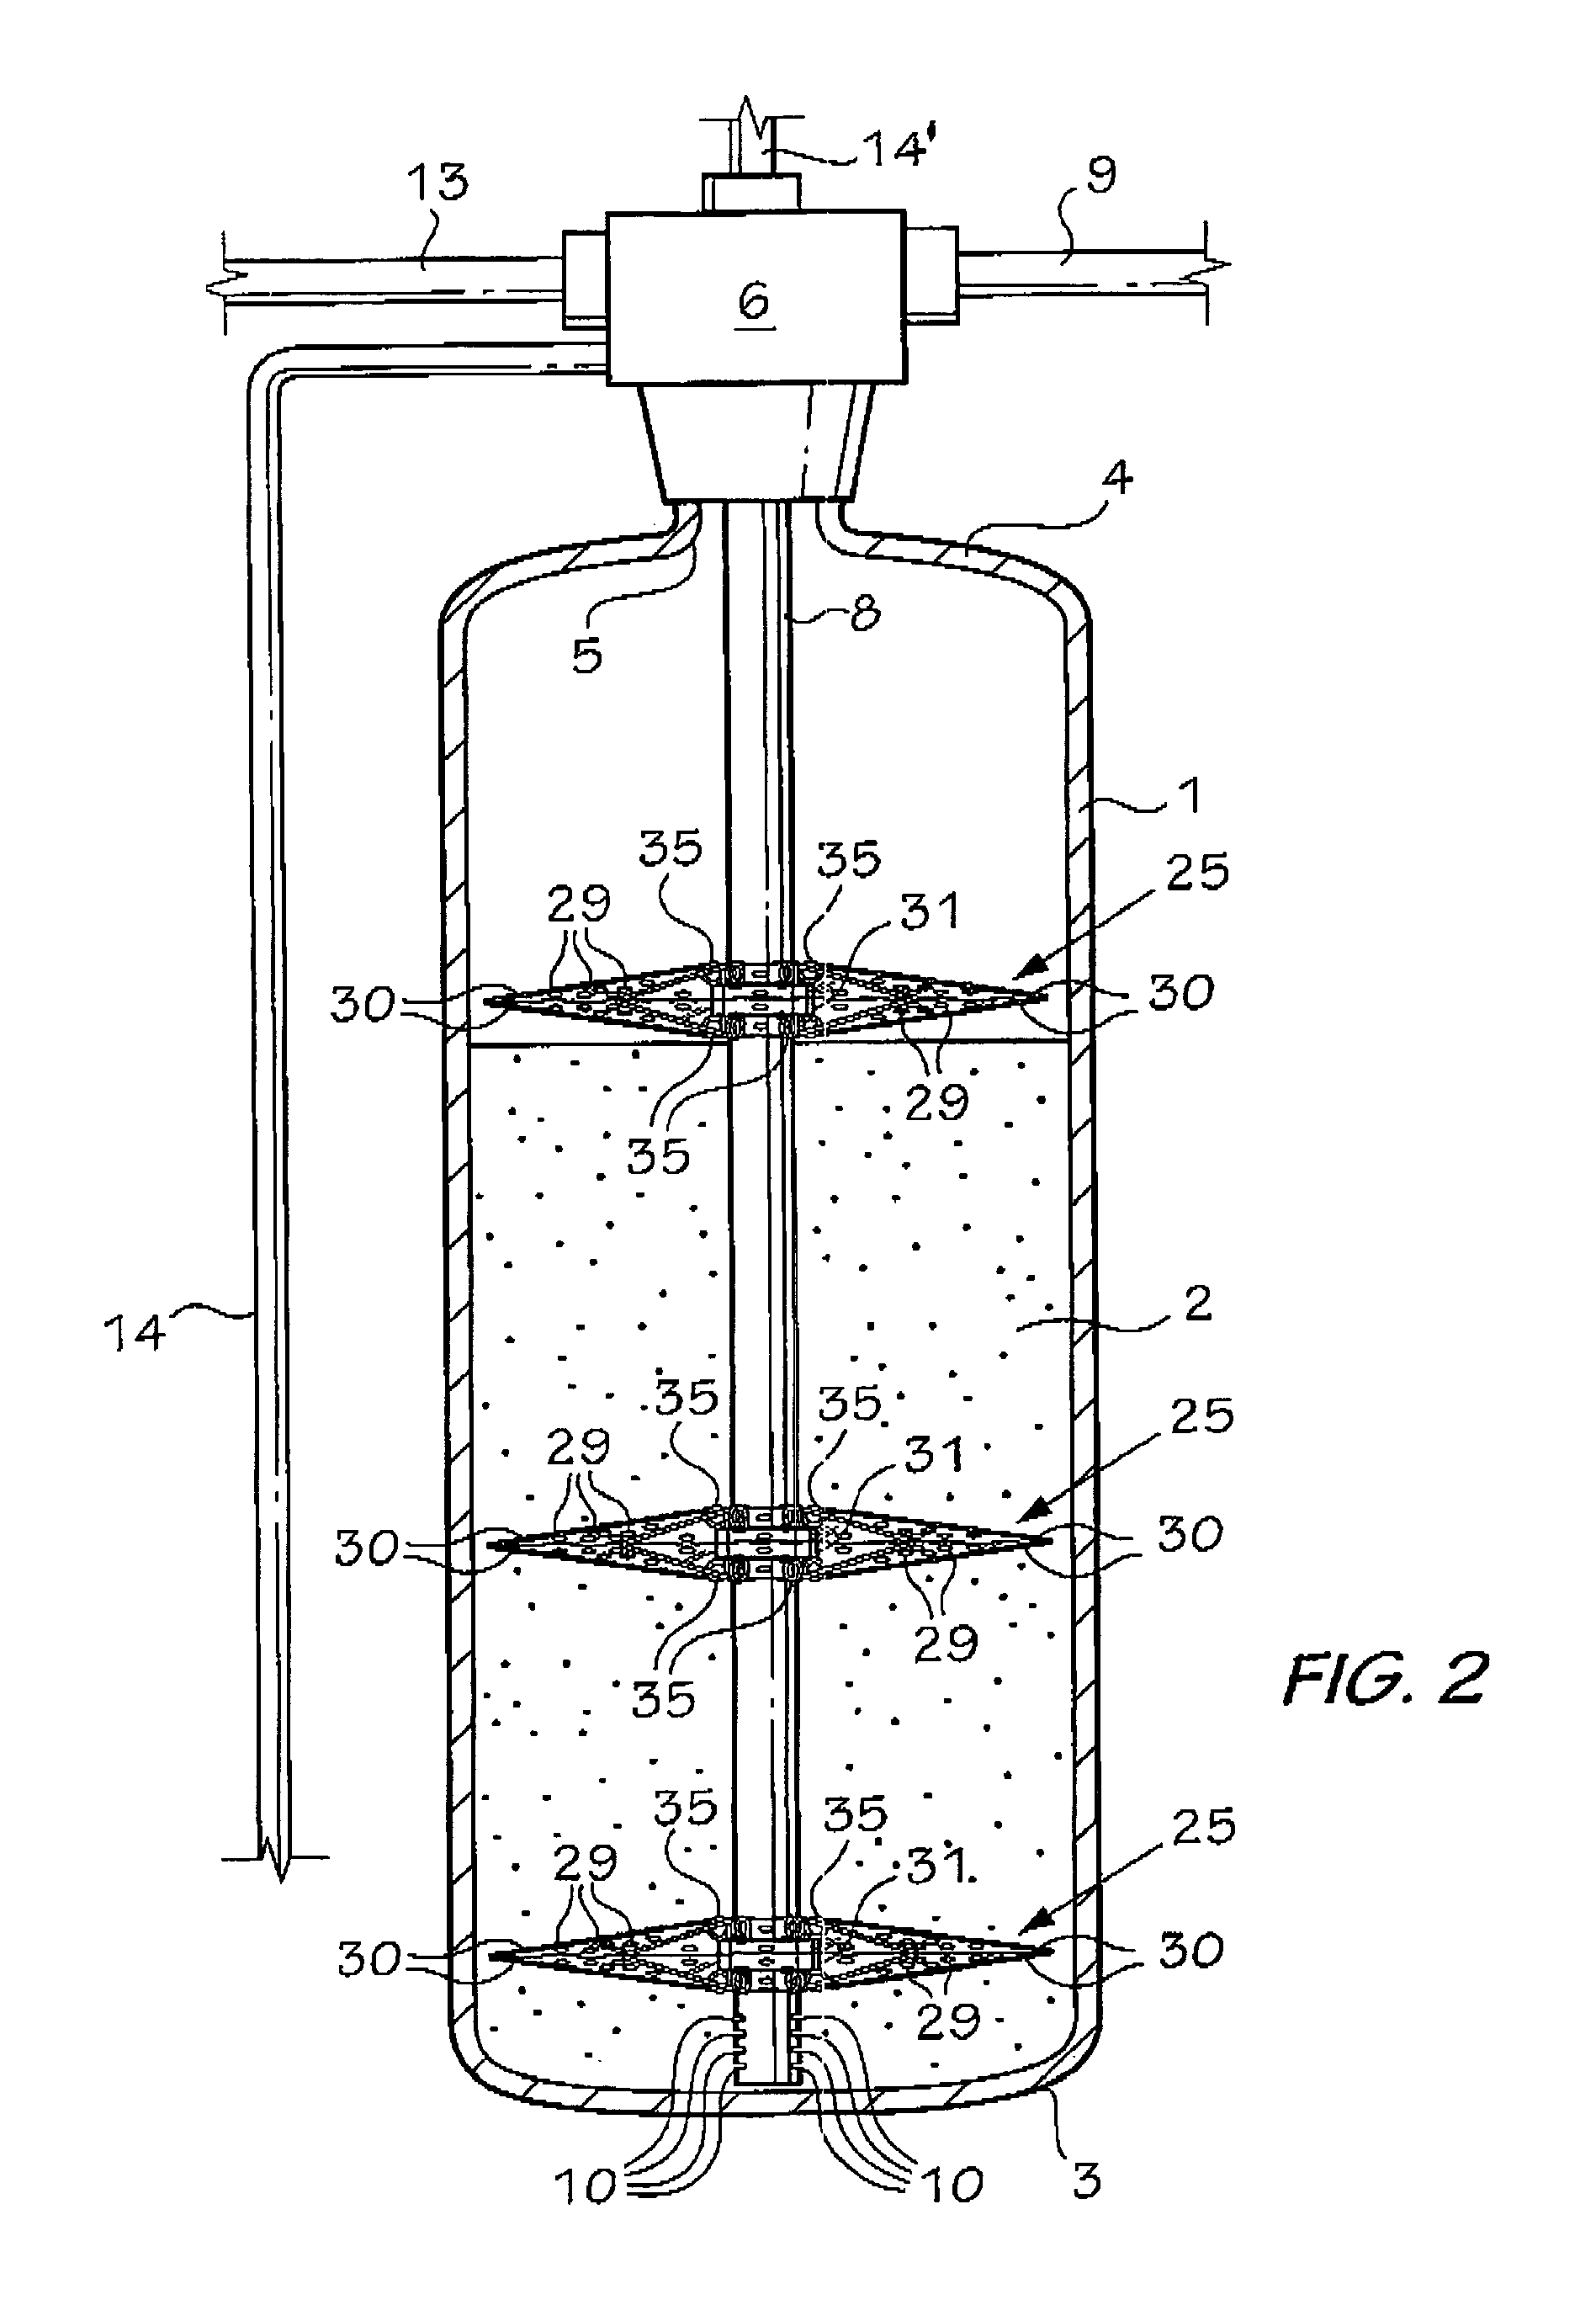 Water conditioner assembly